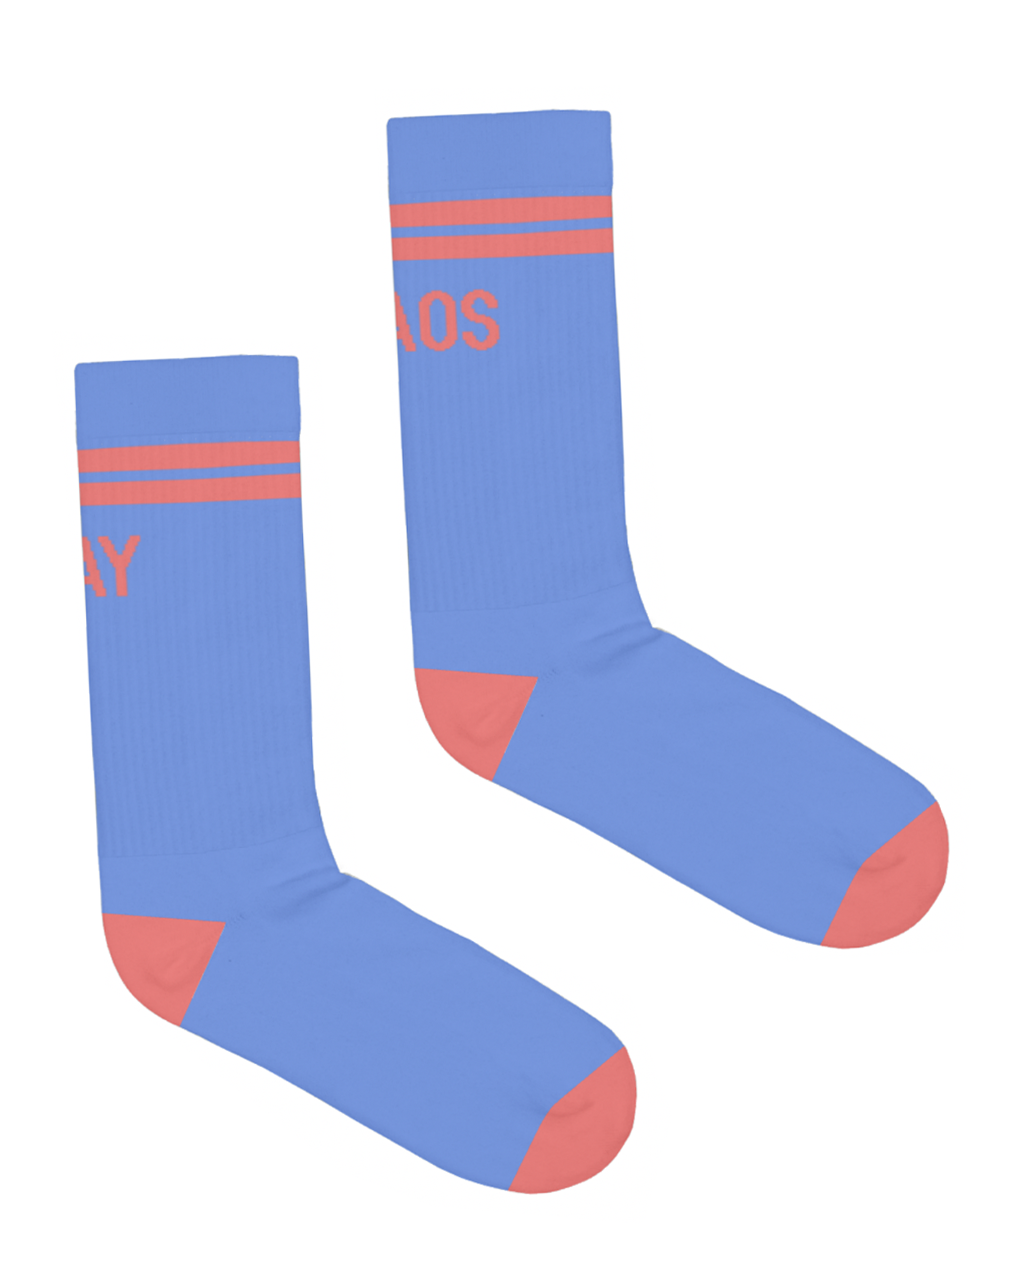 The GAY CHAOS Socks are a new color of our original black-and-white socks. These socks are pastel blue with pastel pink "GAY" on the back left cuff and "CHAOS" on the back right cuff. The style is ribbed cotton crew with compression and cushion. There is also pastel pink heel and toe color.